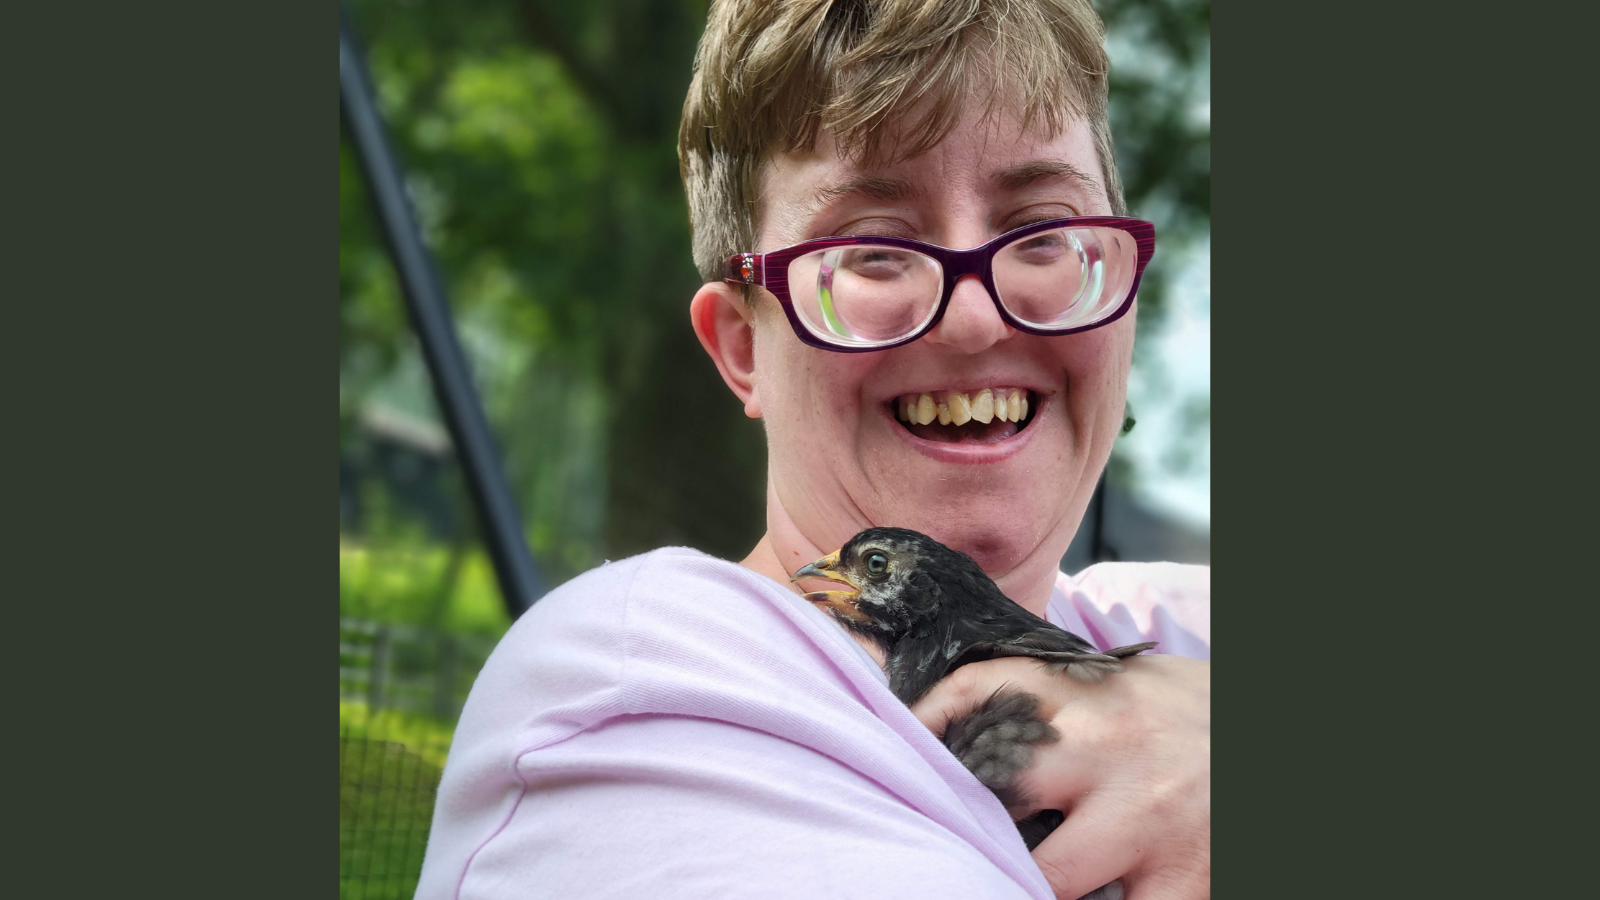 A woman with short hair and red glasses smiles as she holds a chicken that is a few weeks old.